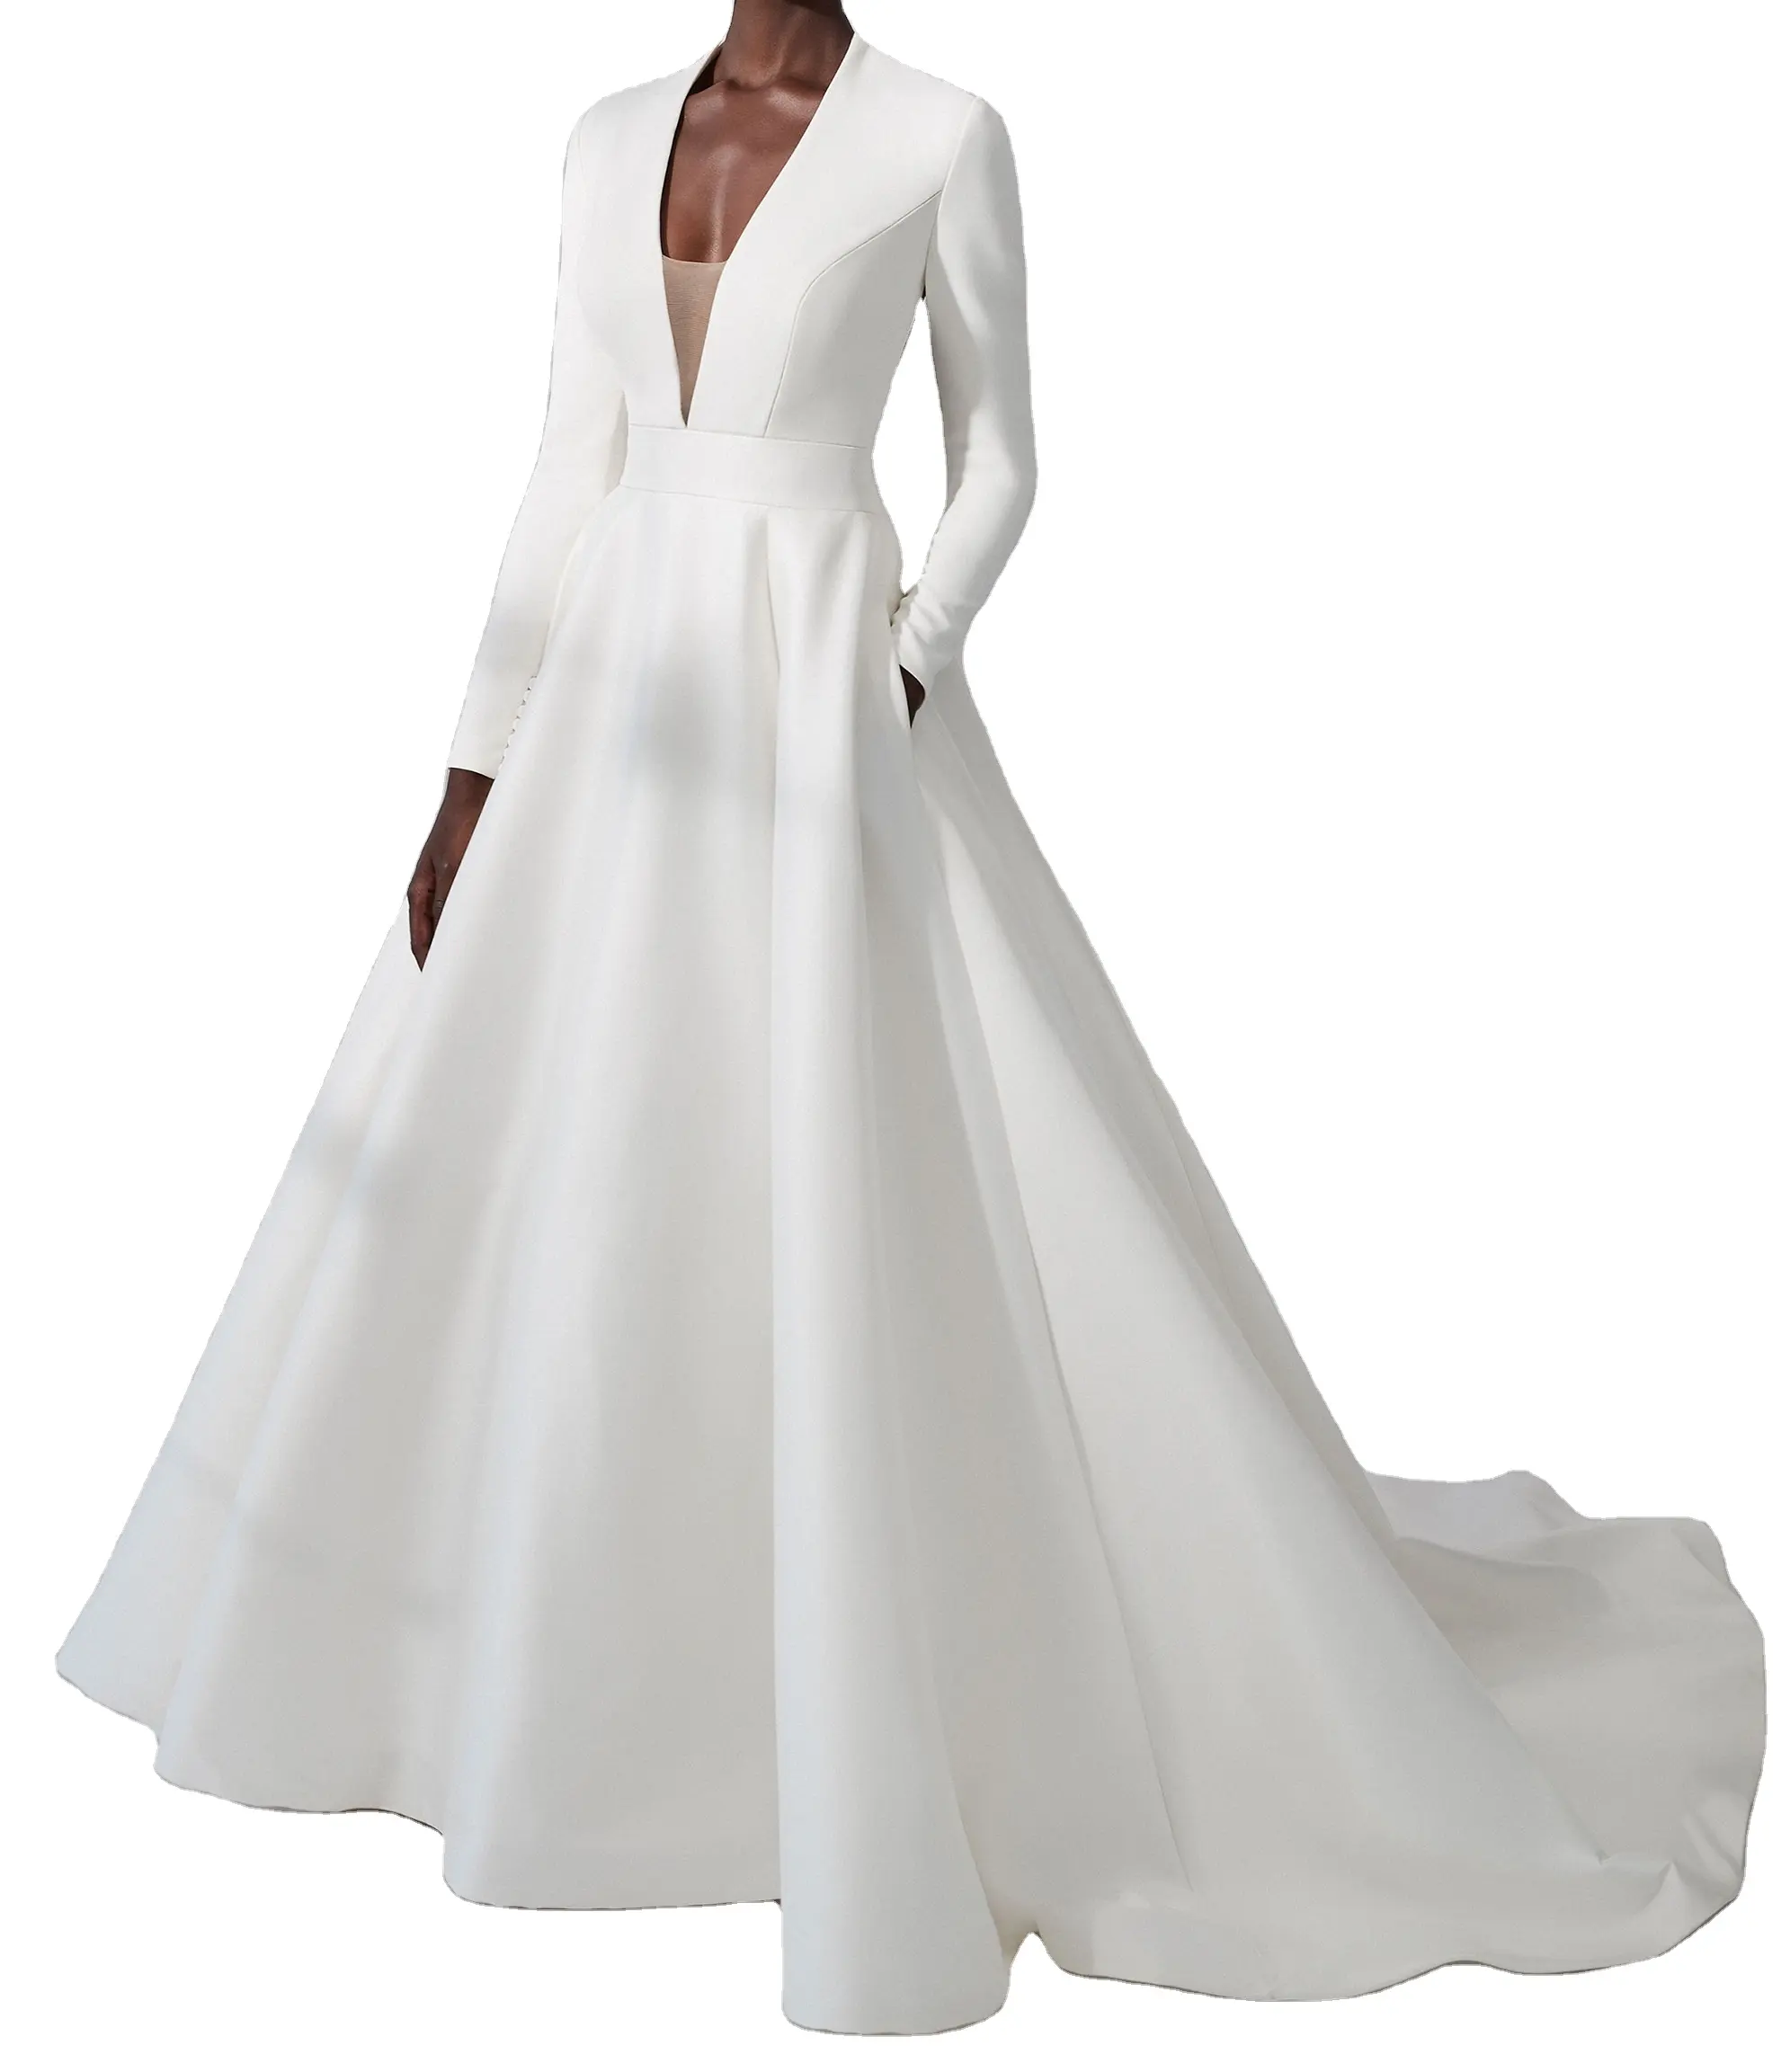 Plain Solid White Clean Long Sleeve Ball Gown Simple Elegant Wedding Gown Illusion Back with Long Trail